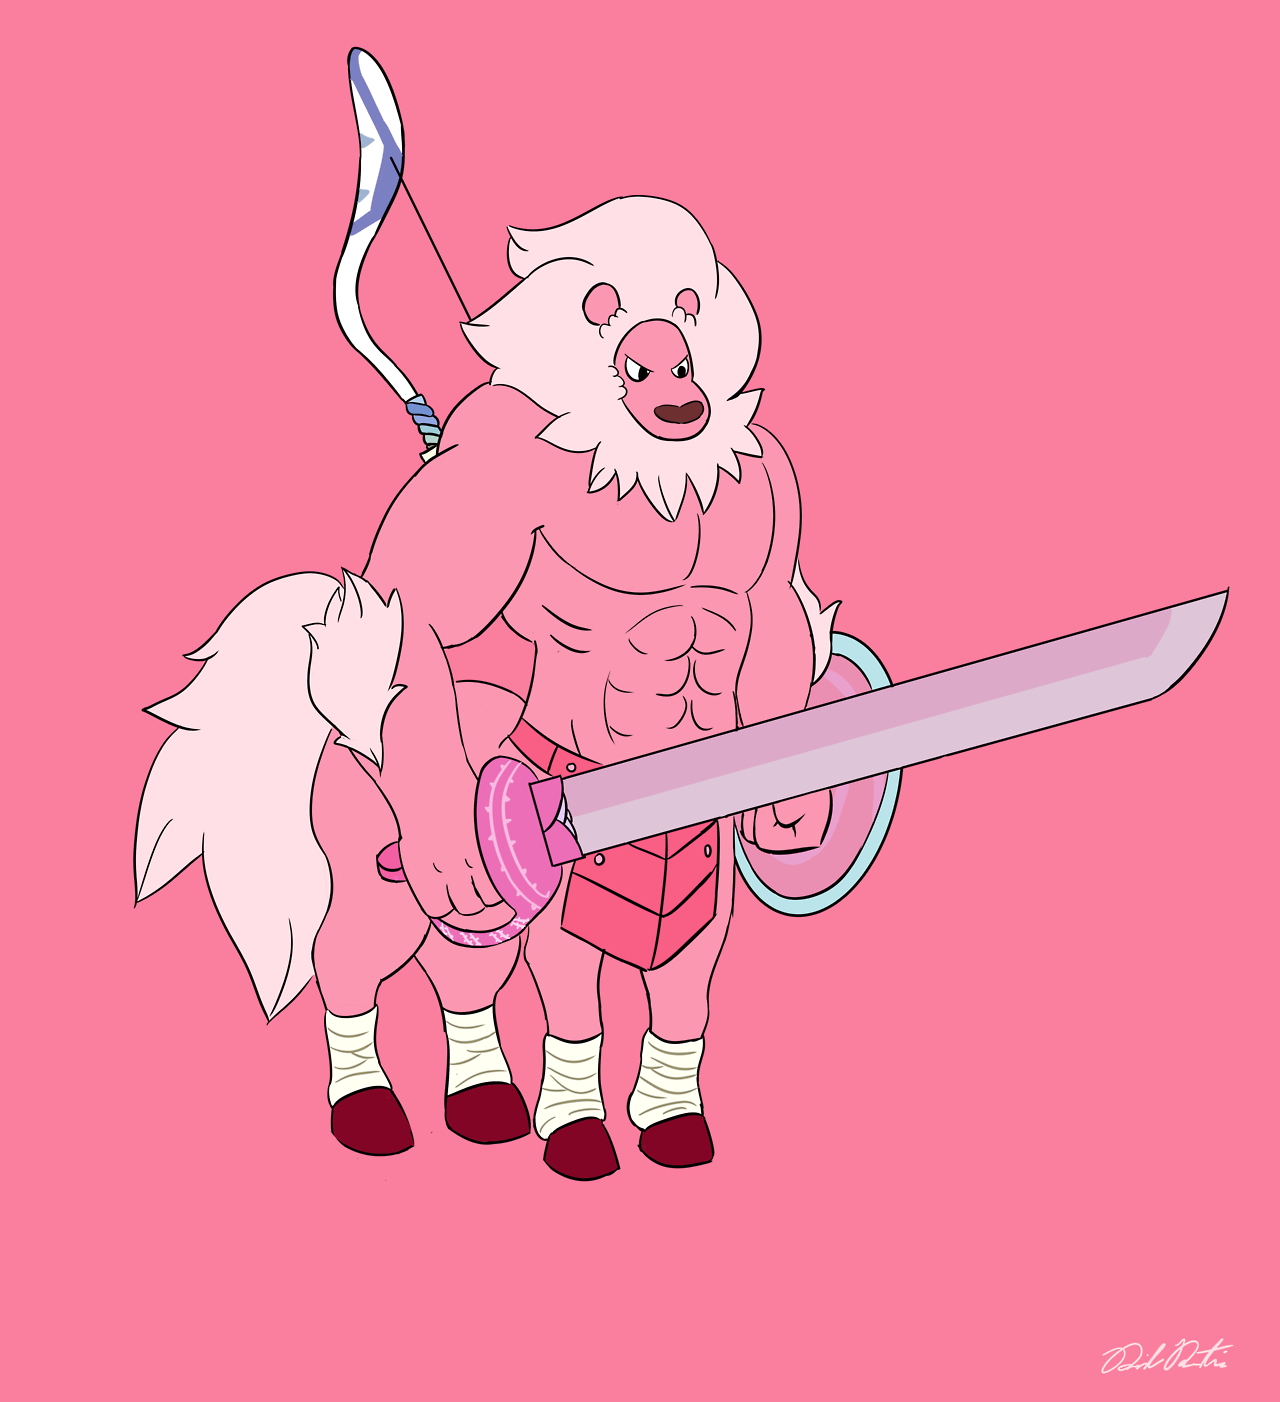 It’s a pink maned Lynel…Lion-el? A piece I had been working on for a while now, and I am really happy how it turned out. Adding the bow really helped it come together, I hope yall like it.